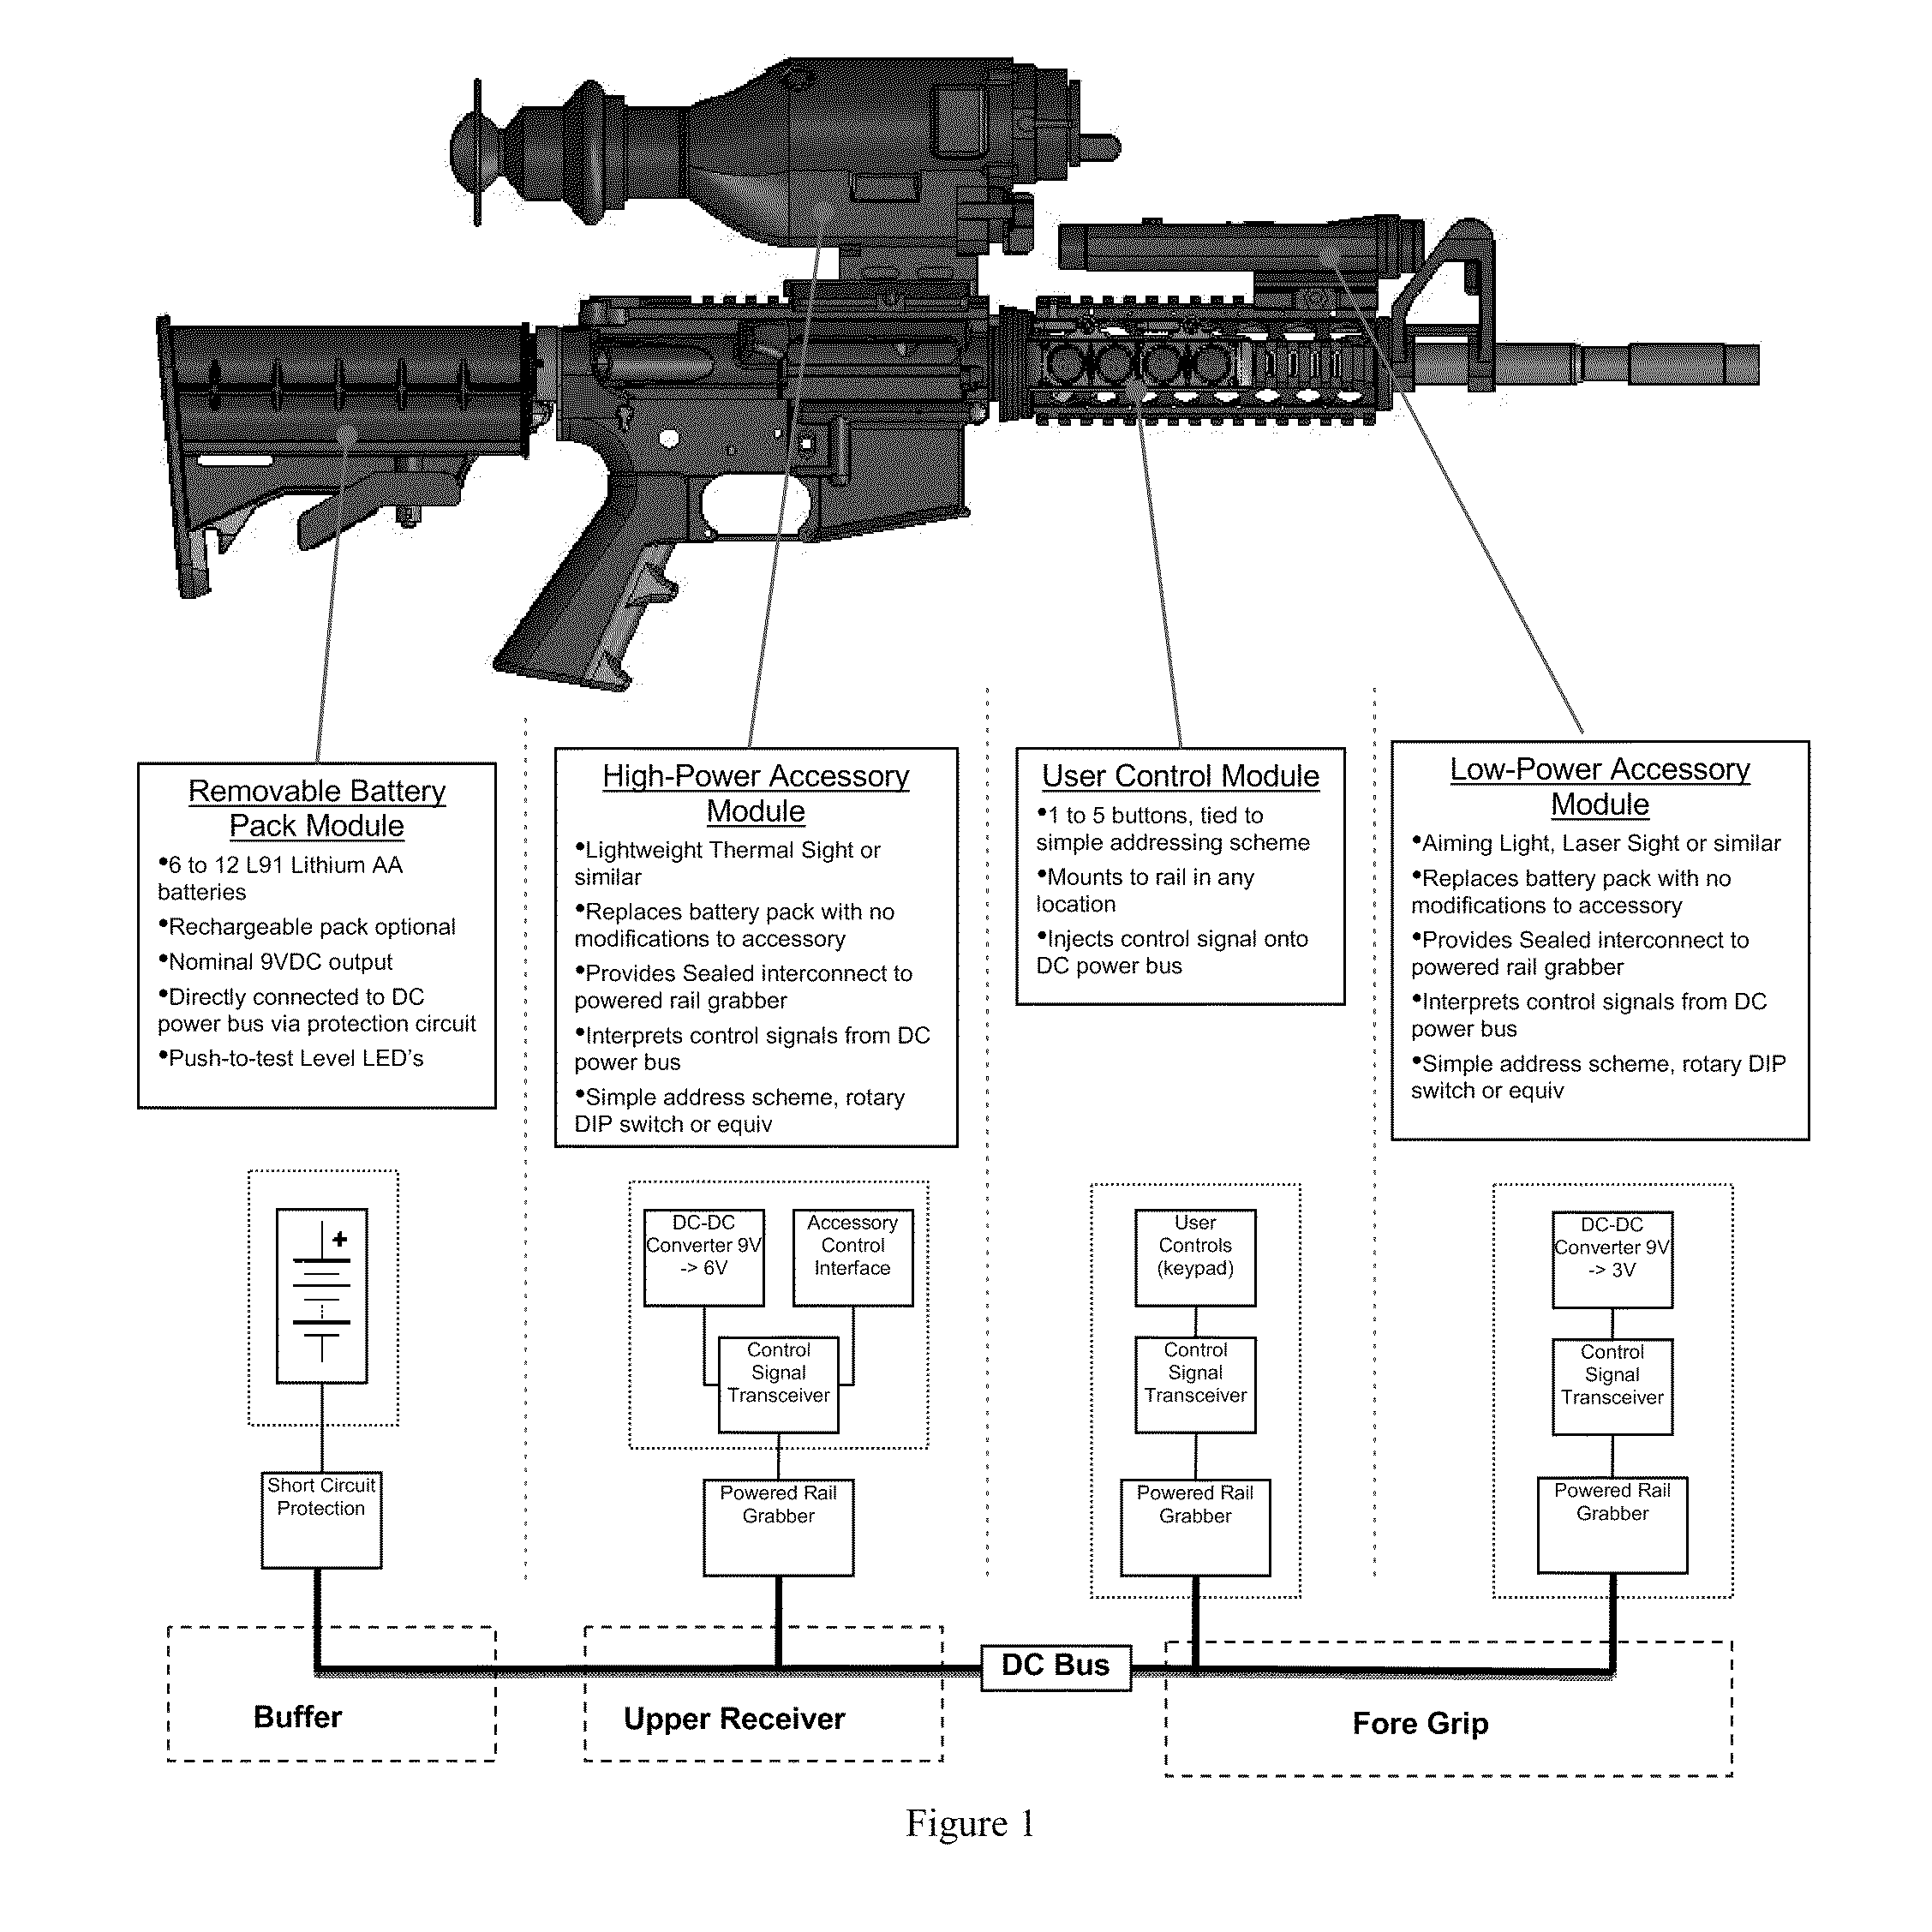 Rifle accessory rail, communication, and power transfer system